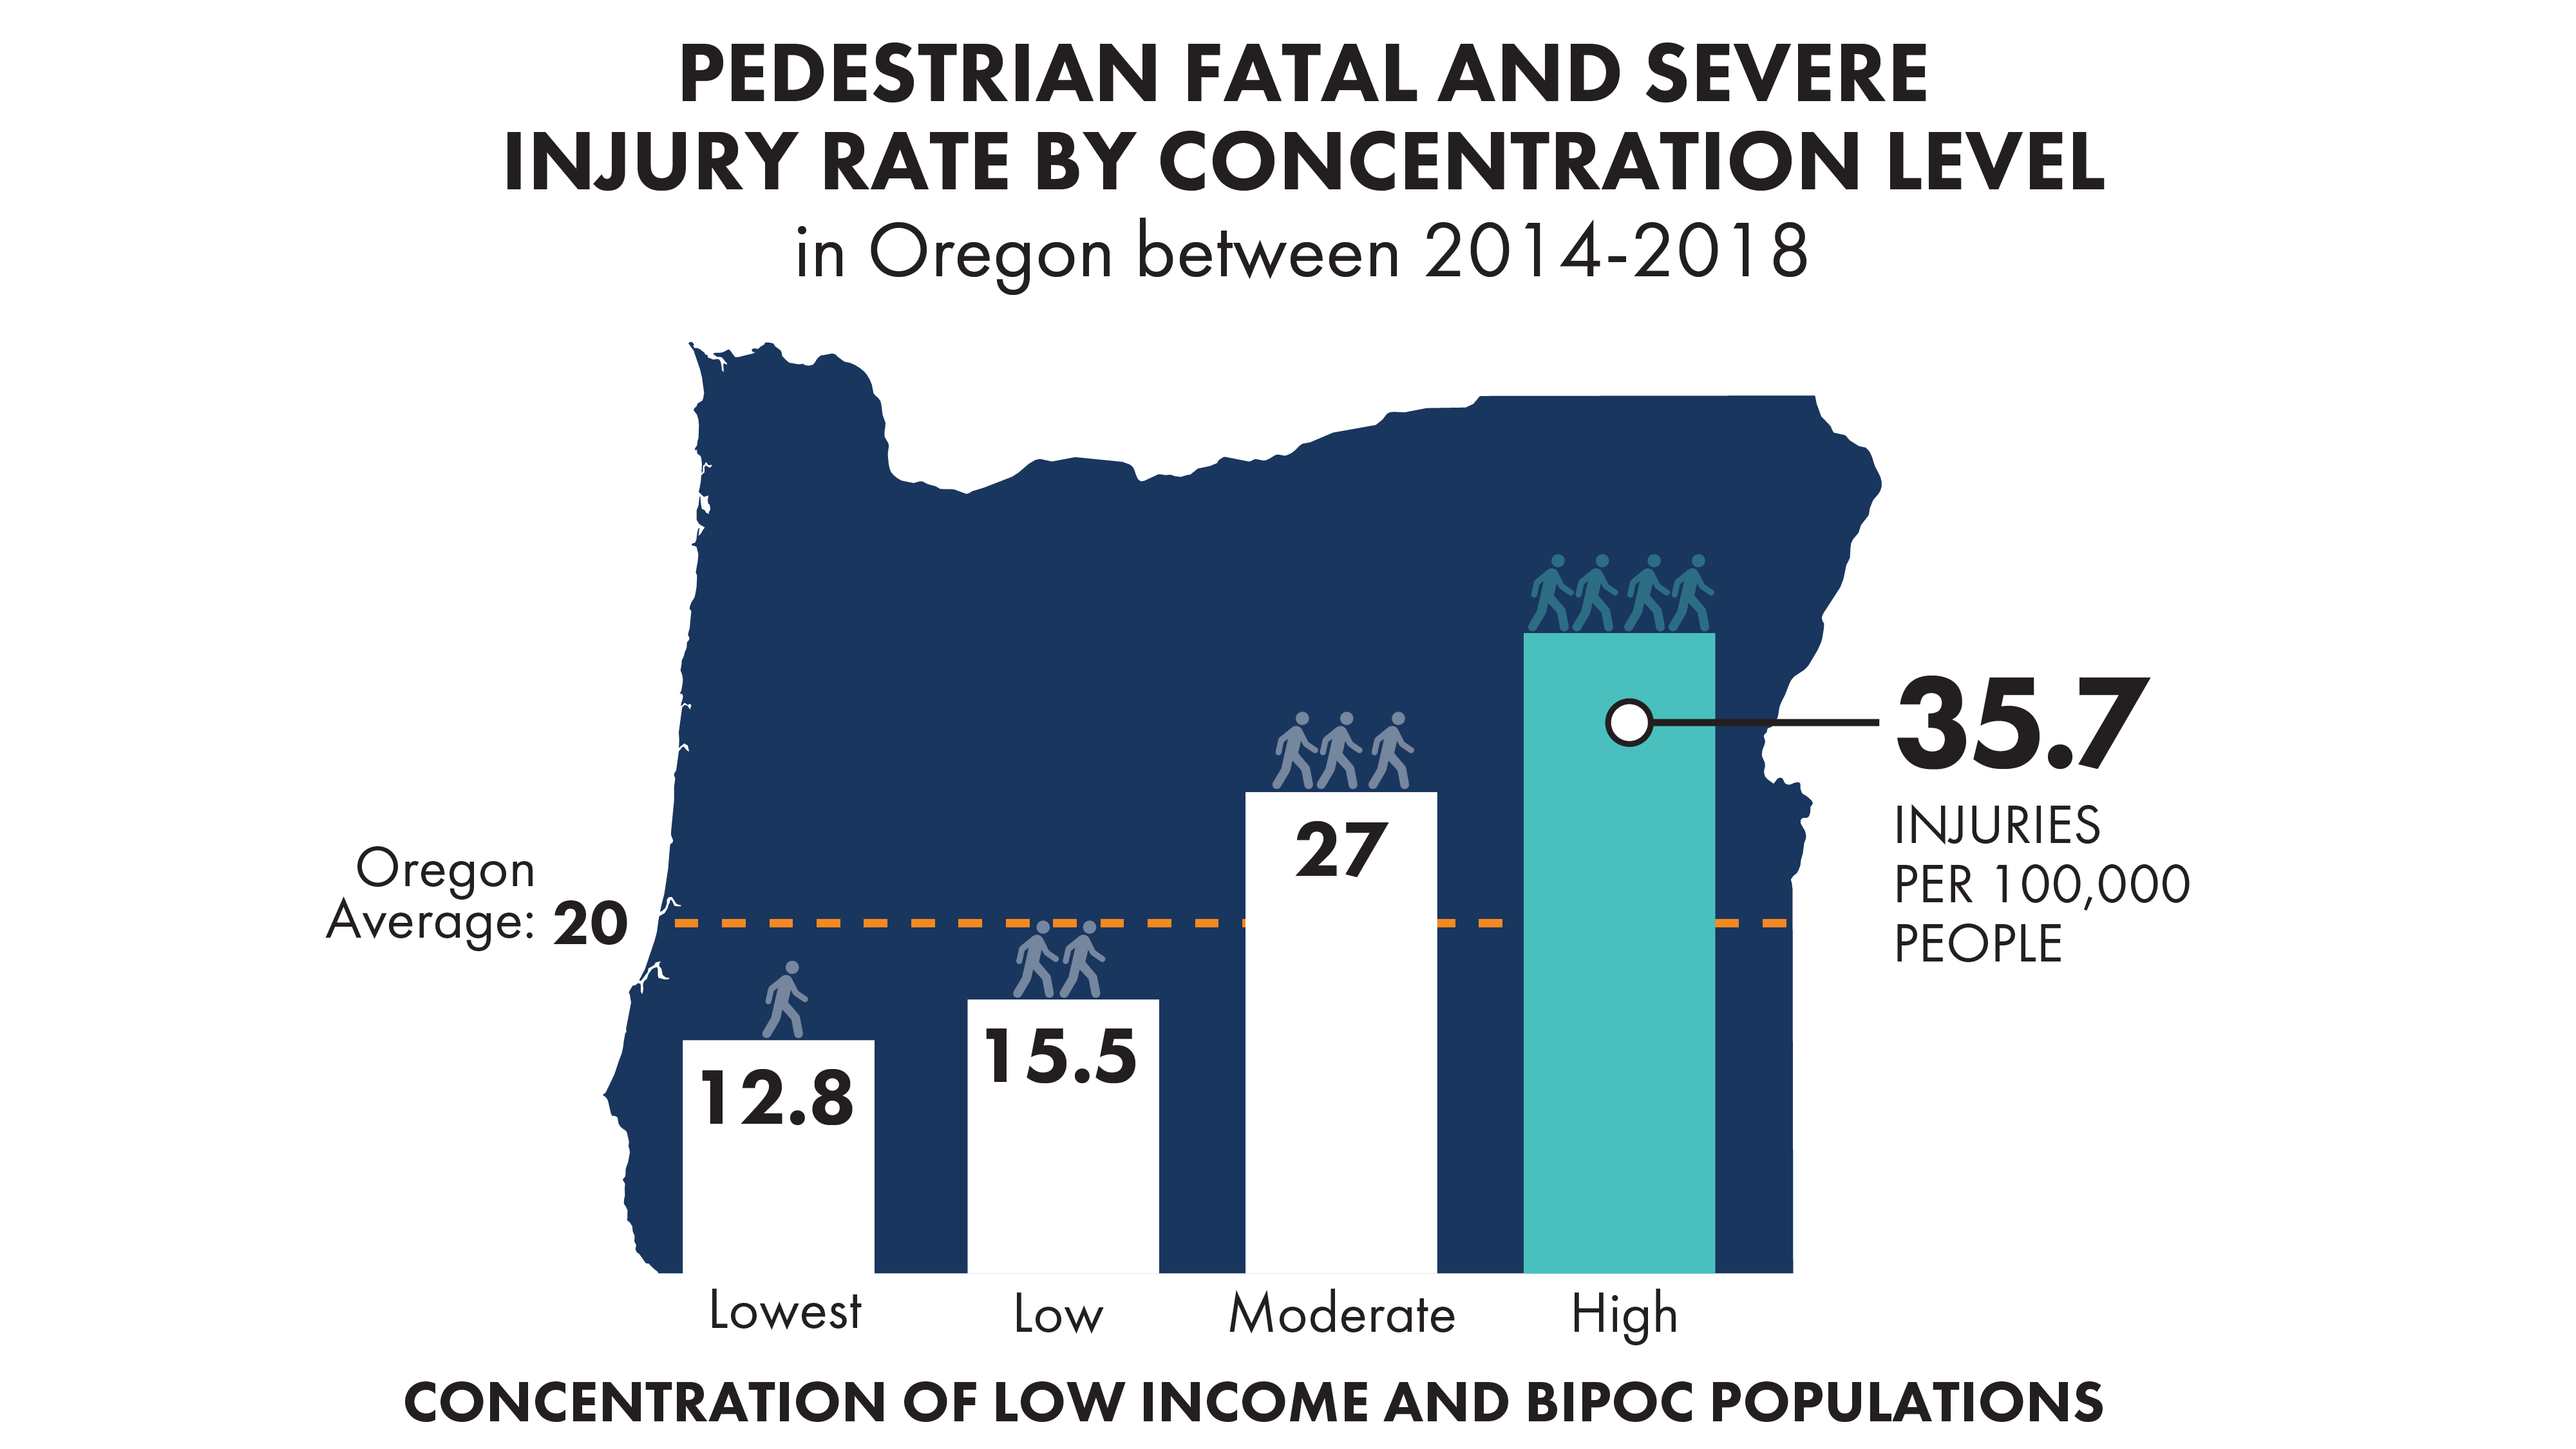 Pedestrian fatal and severe injury rate by concentration level in Oregon between 2014-2018 showing high concentraion of low income and BIPOC populations